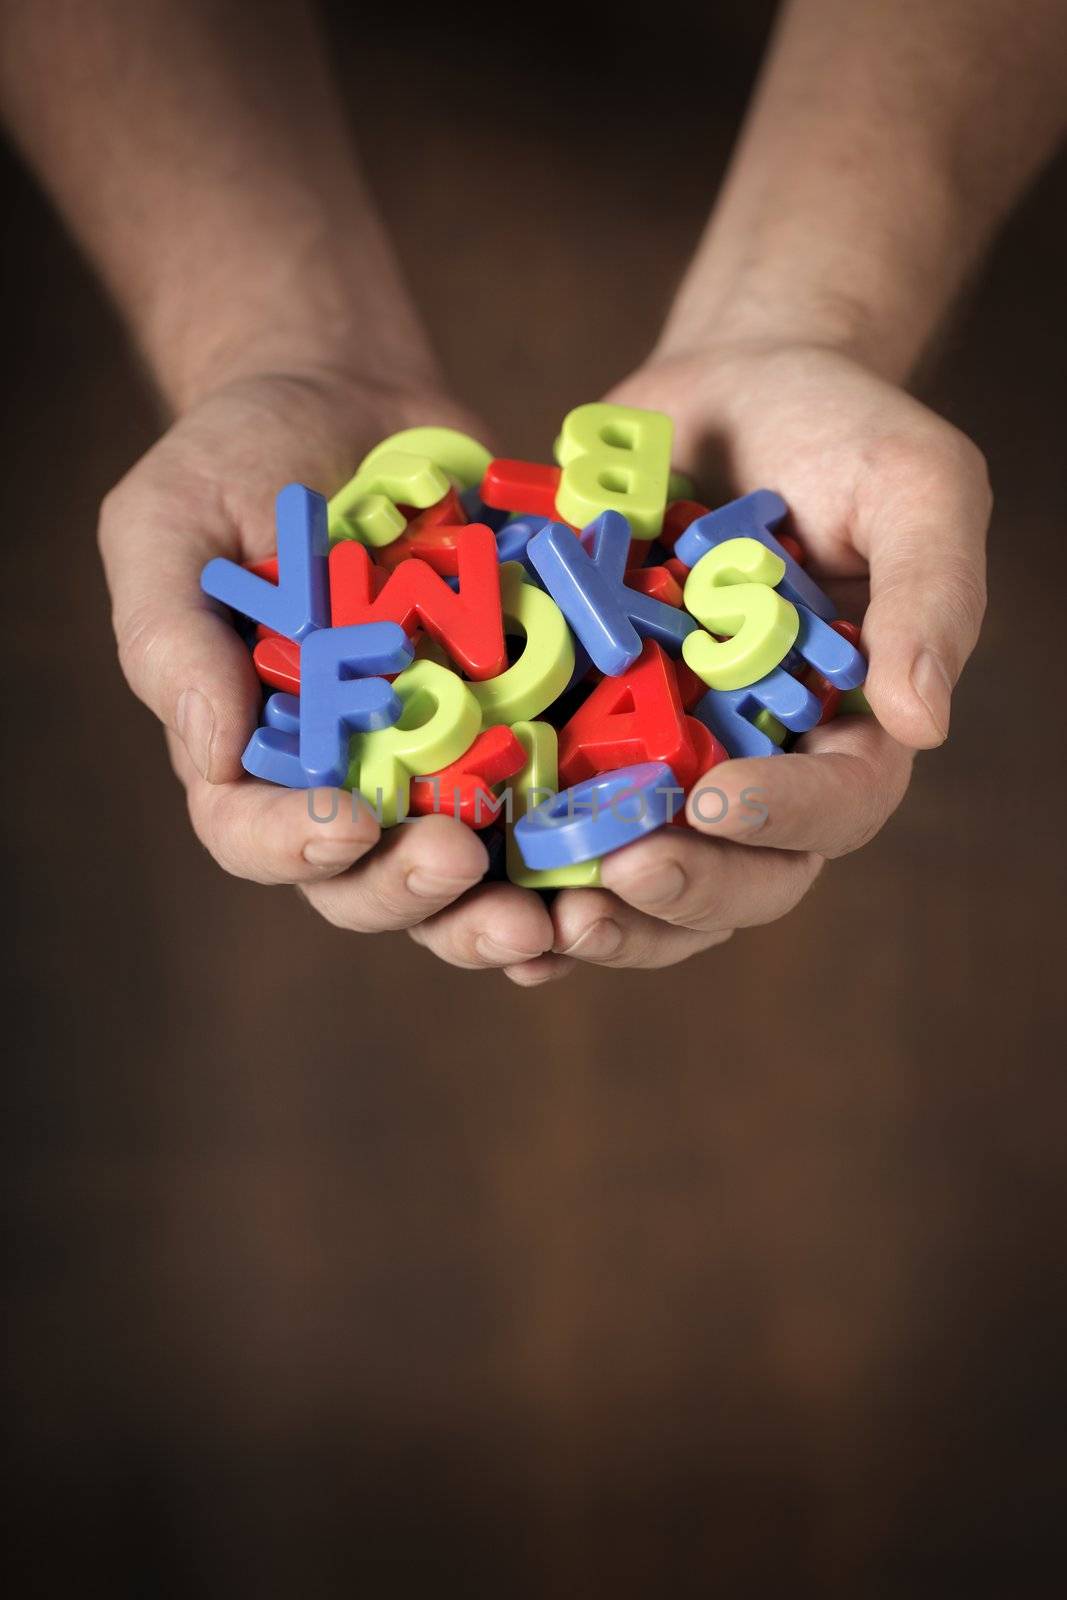 Man holding colorful plastic toy letters in his hands